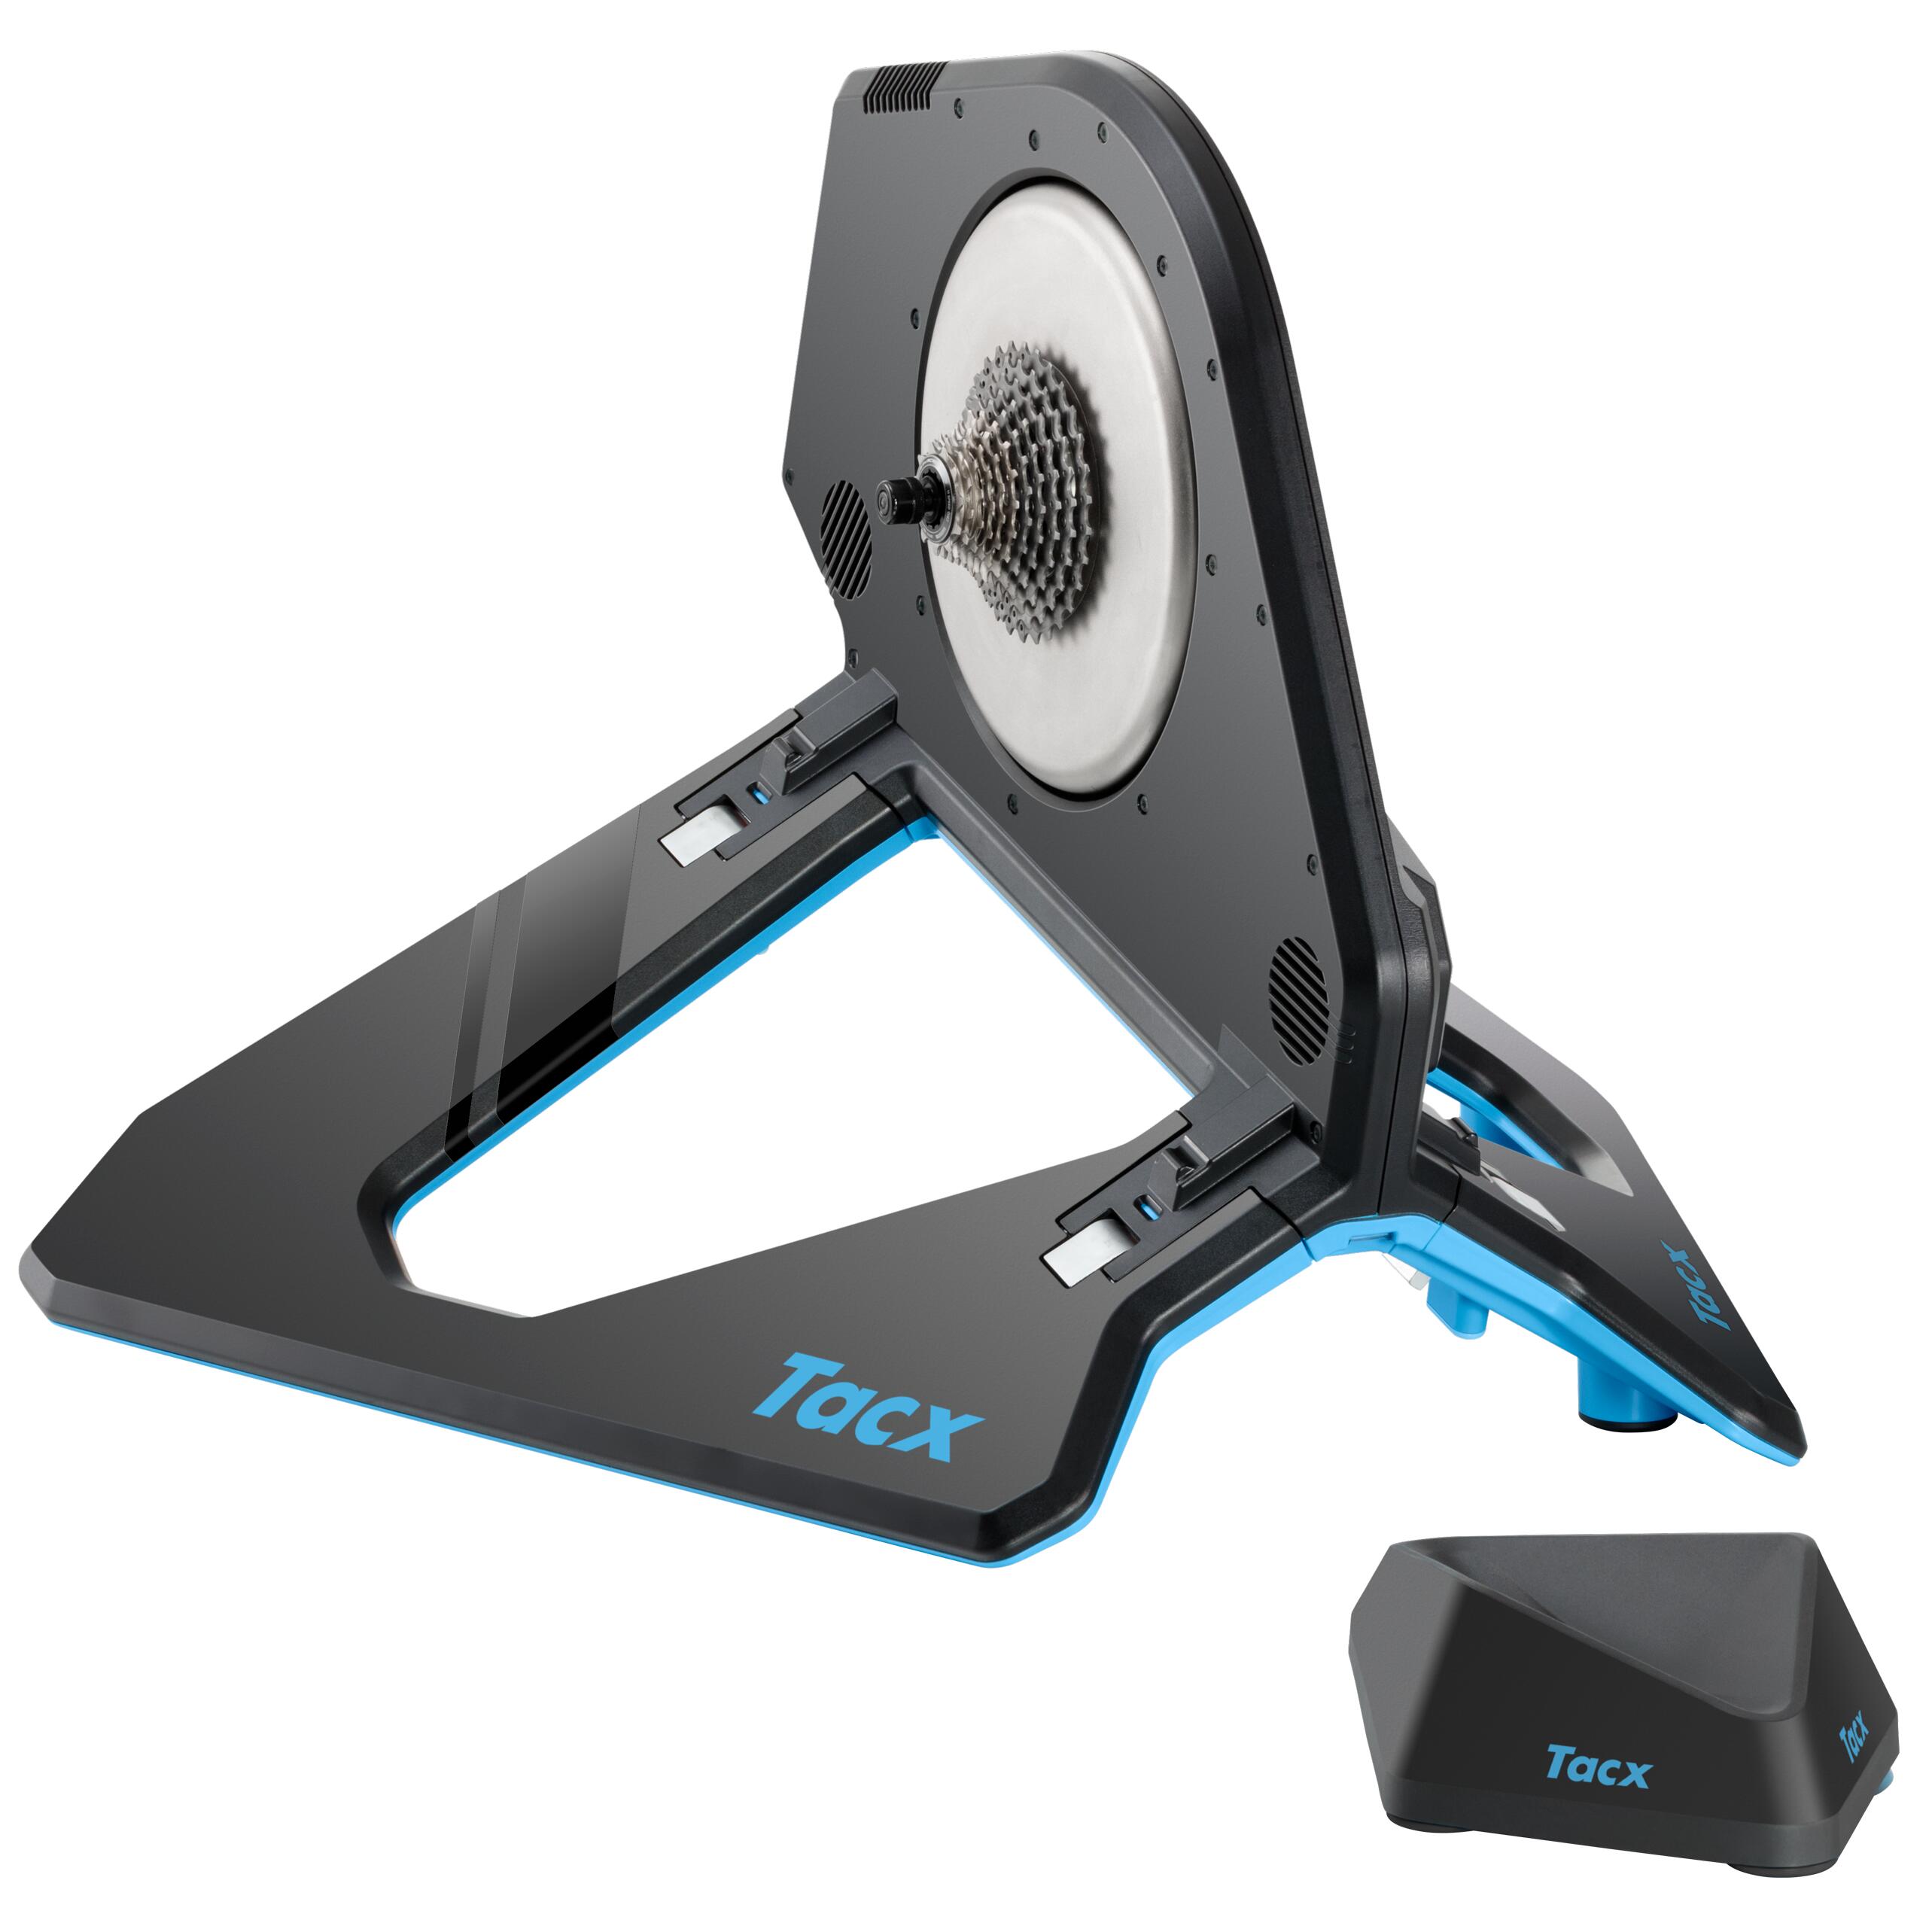 Home trainer TACX NEO 2T SMART TACX decathlon.ro